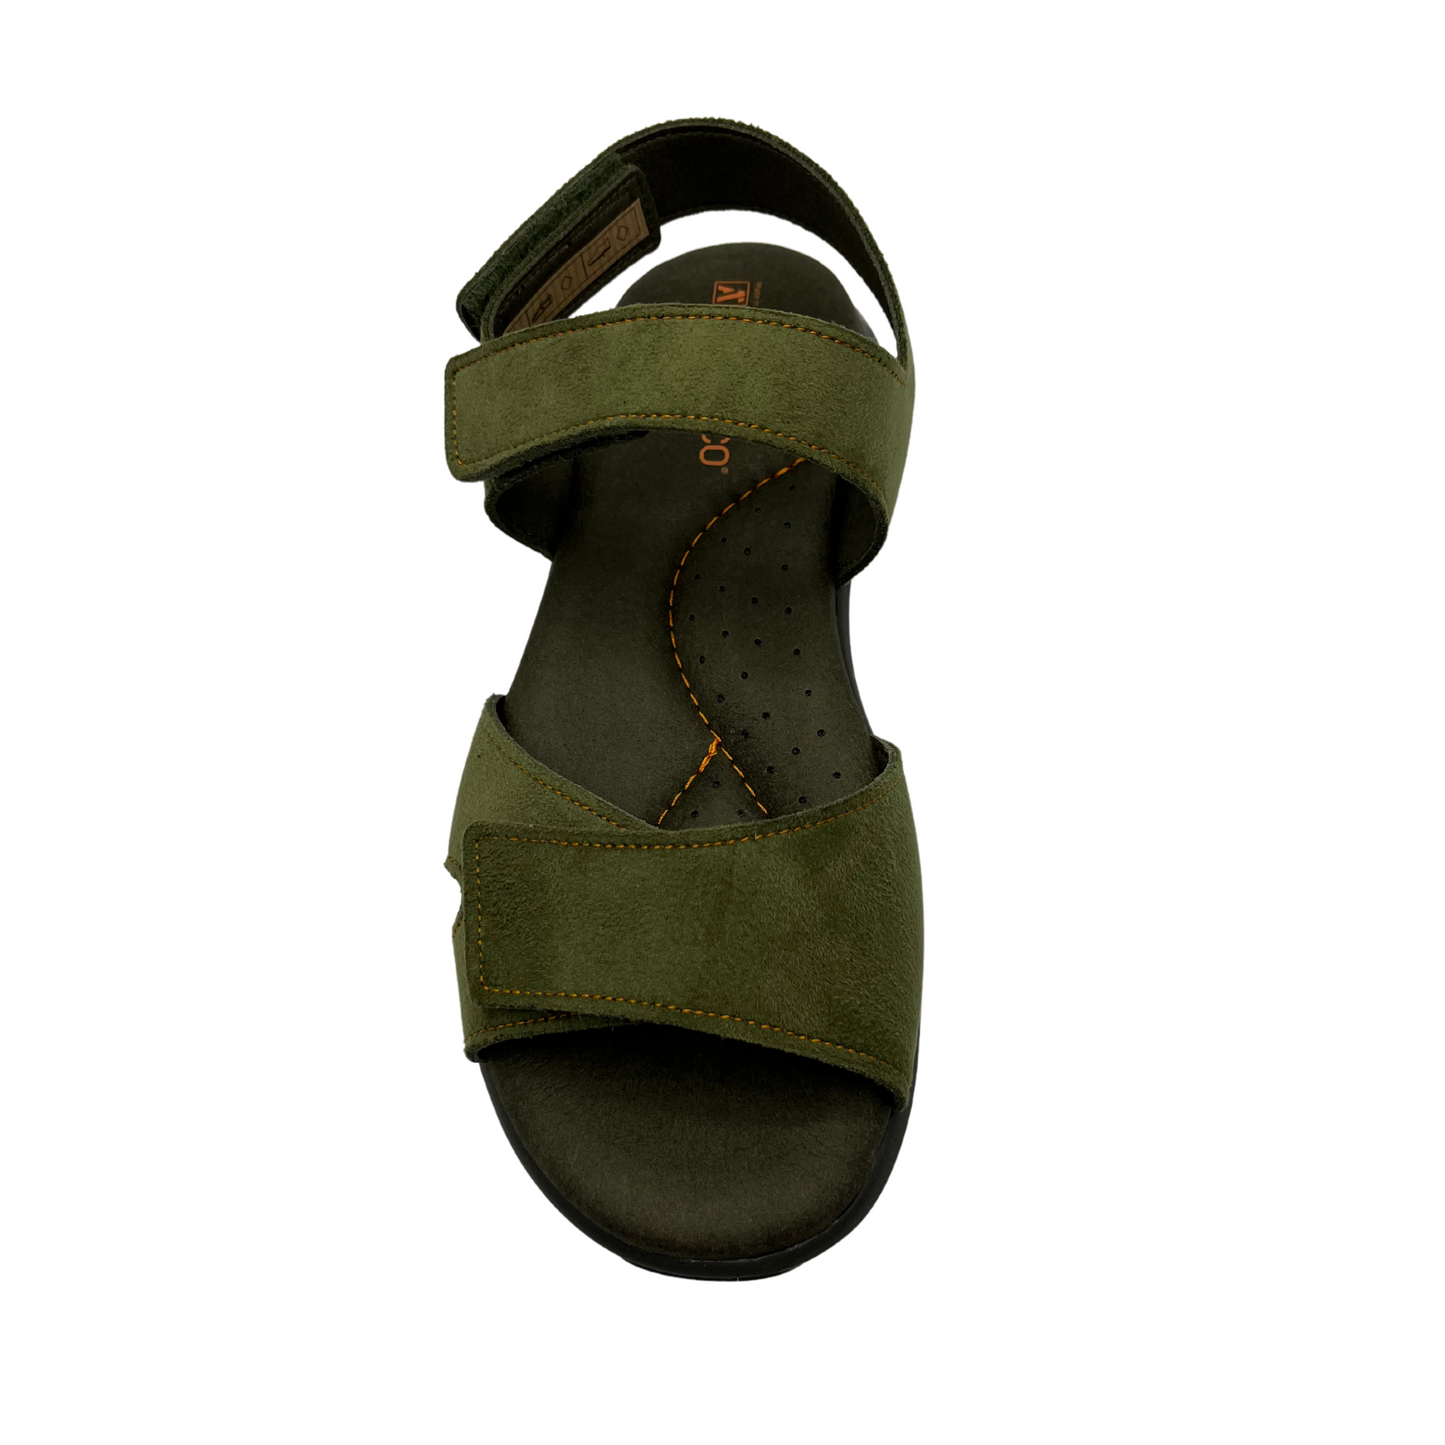 Top view of green leather sandals with 3 adjustable velcro straps and open toe